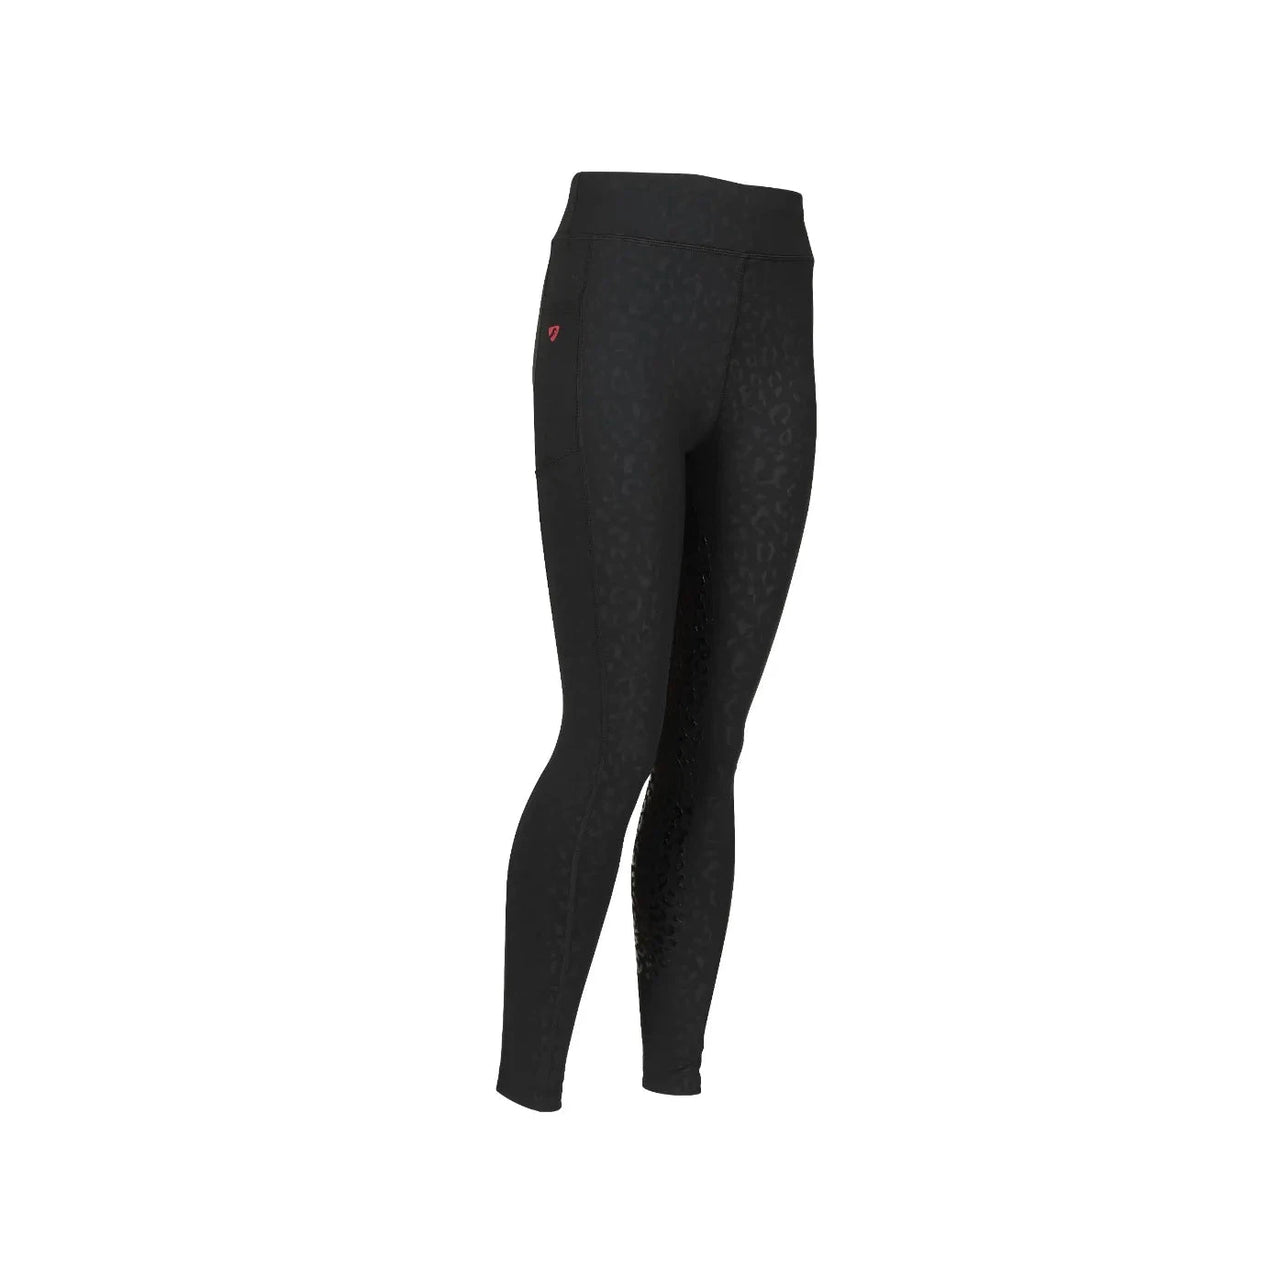 Aubrion Young Rider Non-Stop Riding Tights